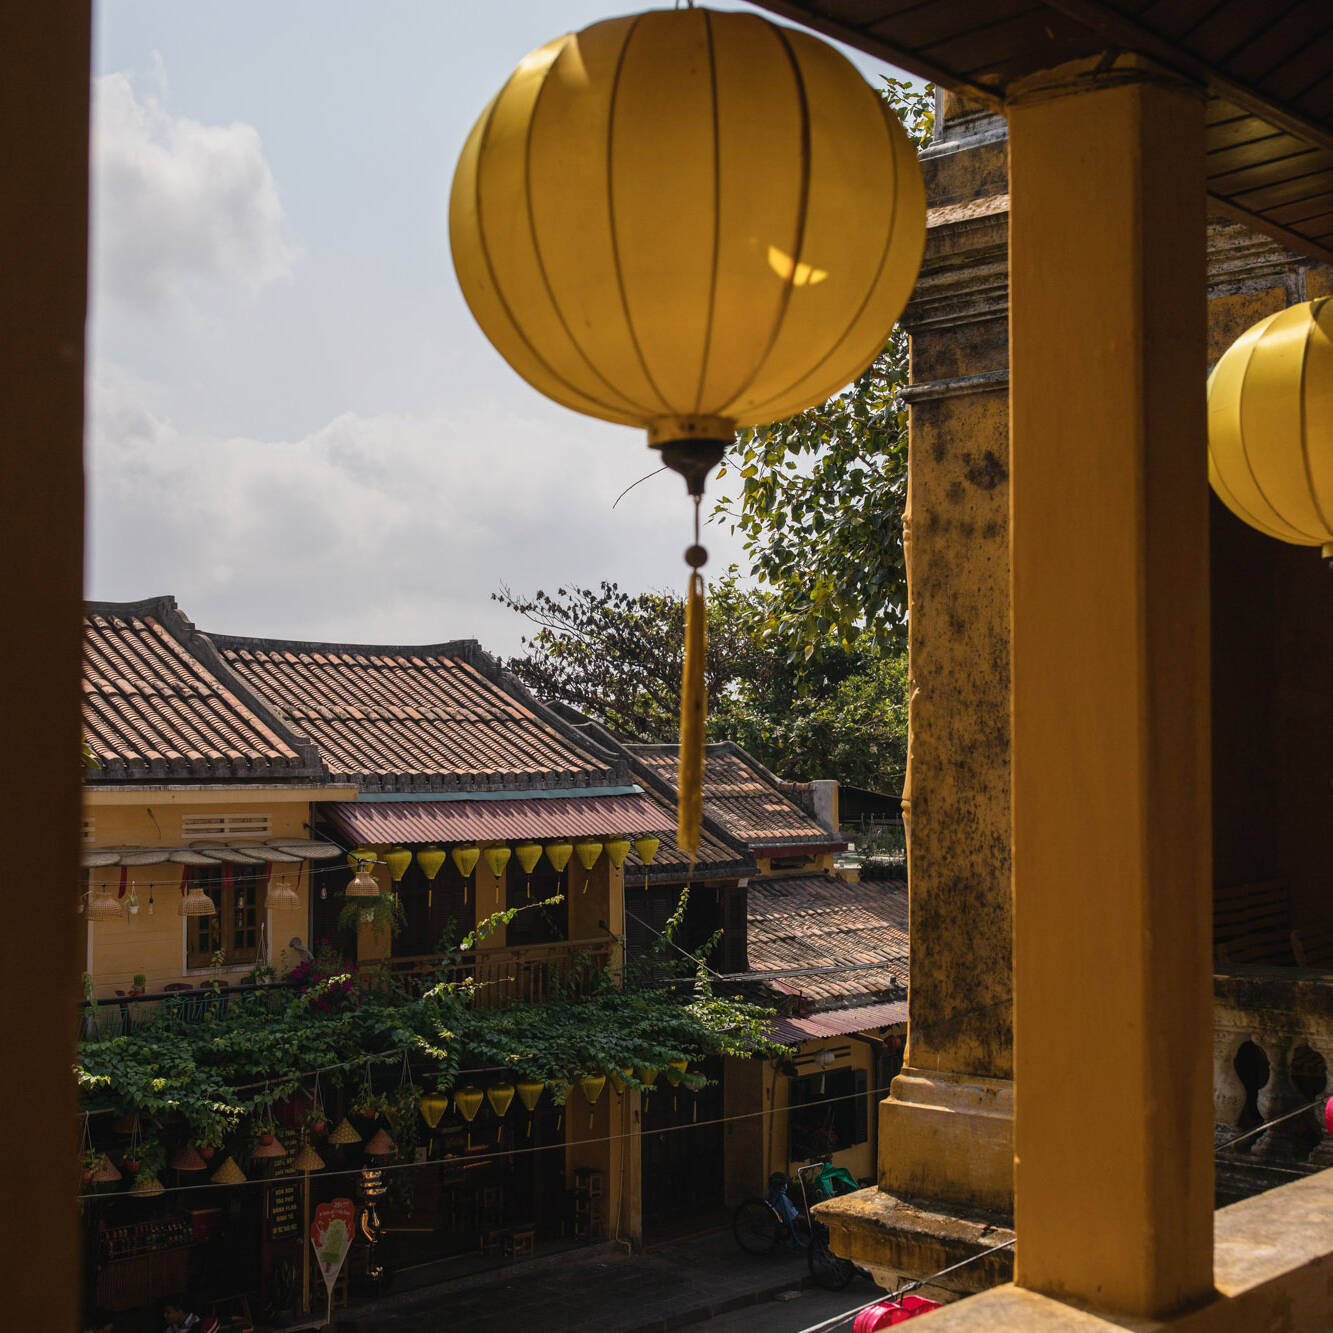 Hoi An Ancient Town - Top cultural experiences and activities in Hoi An and Quang Nam